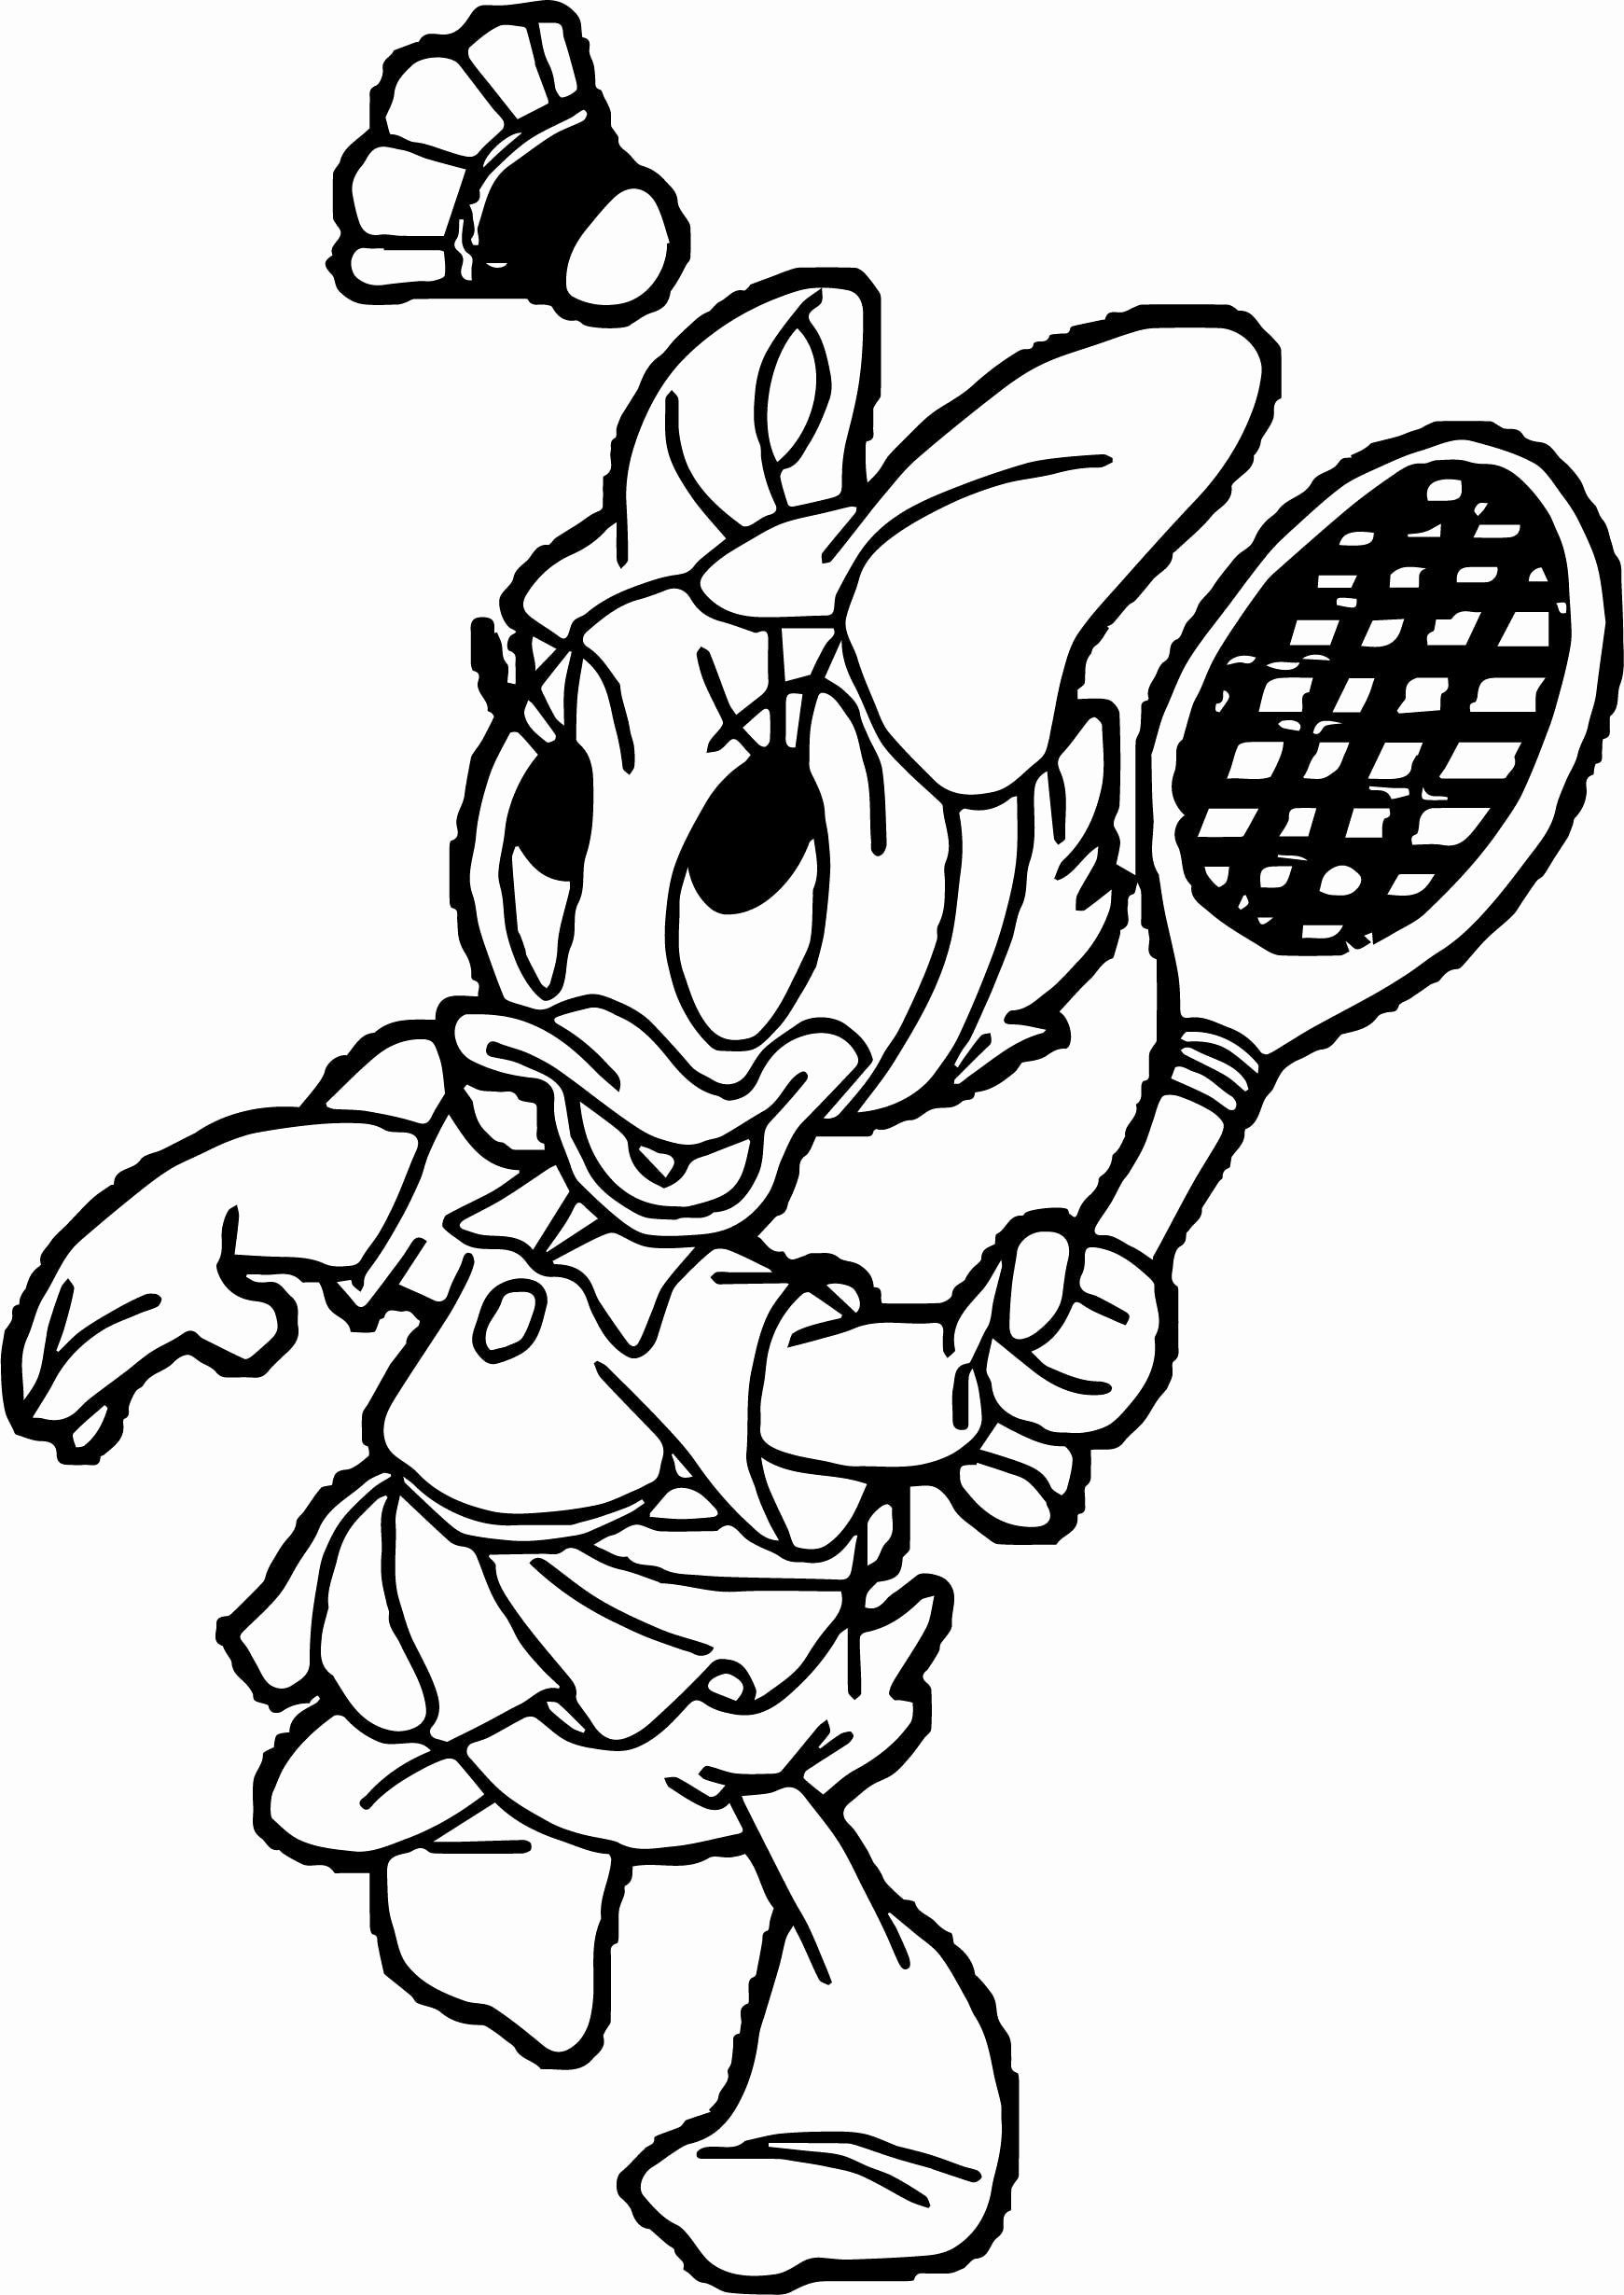 cartoon racketlhon coloring pages